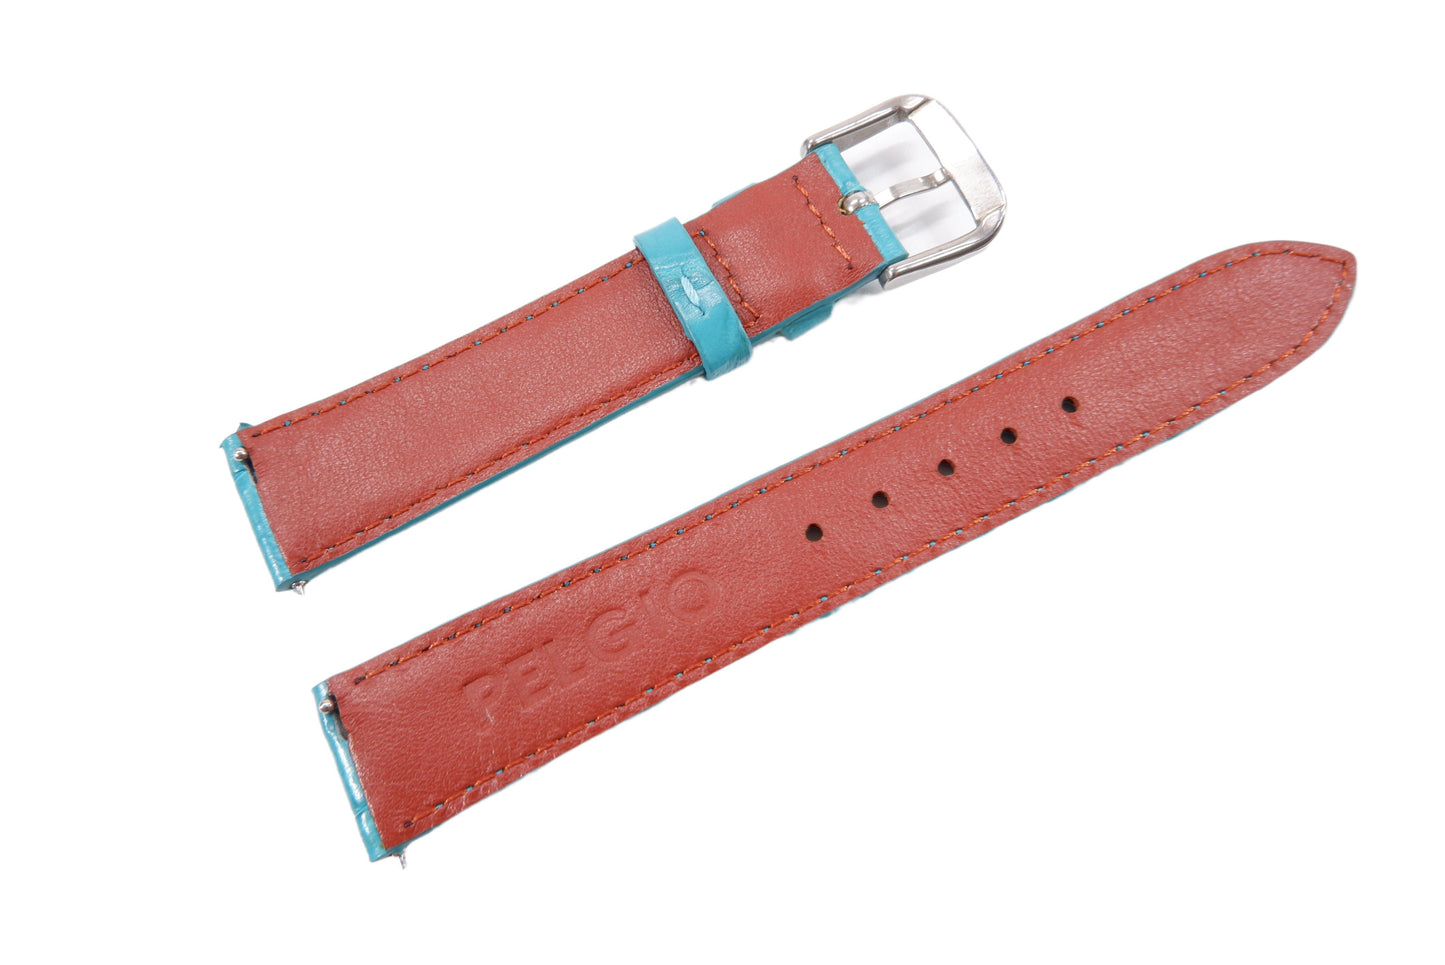 Genuine Crocodile Belly Skin Leather Quick Release Watch Strap Blue Band with Buckle